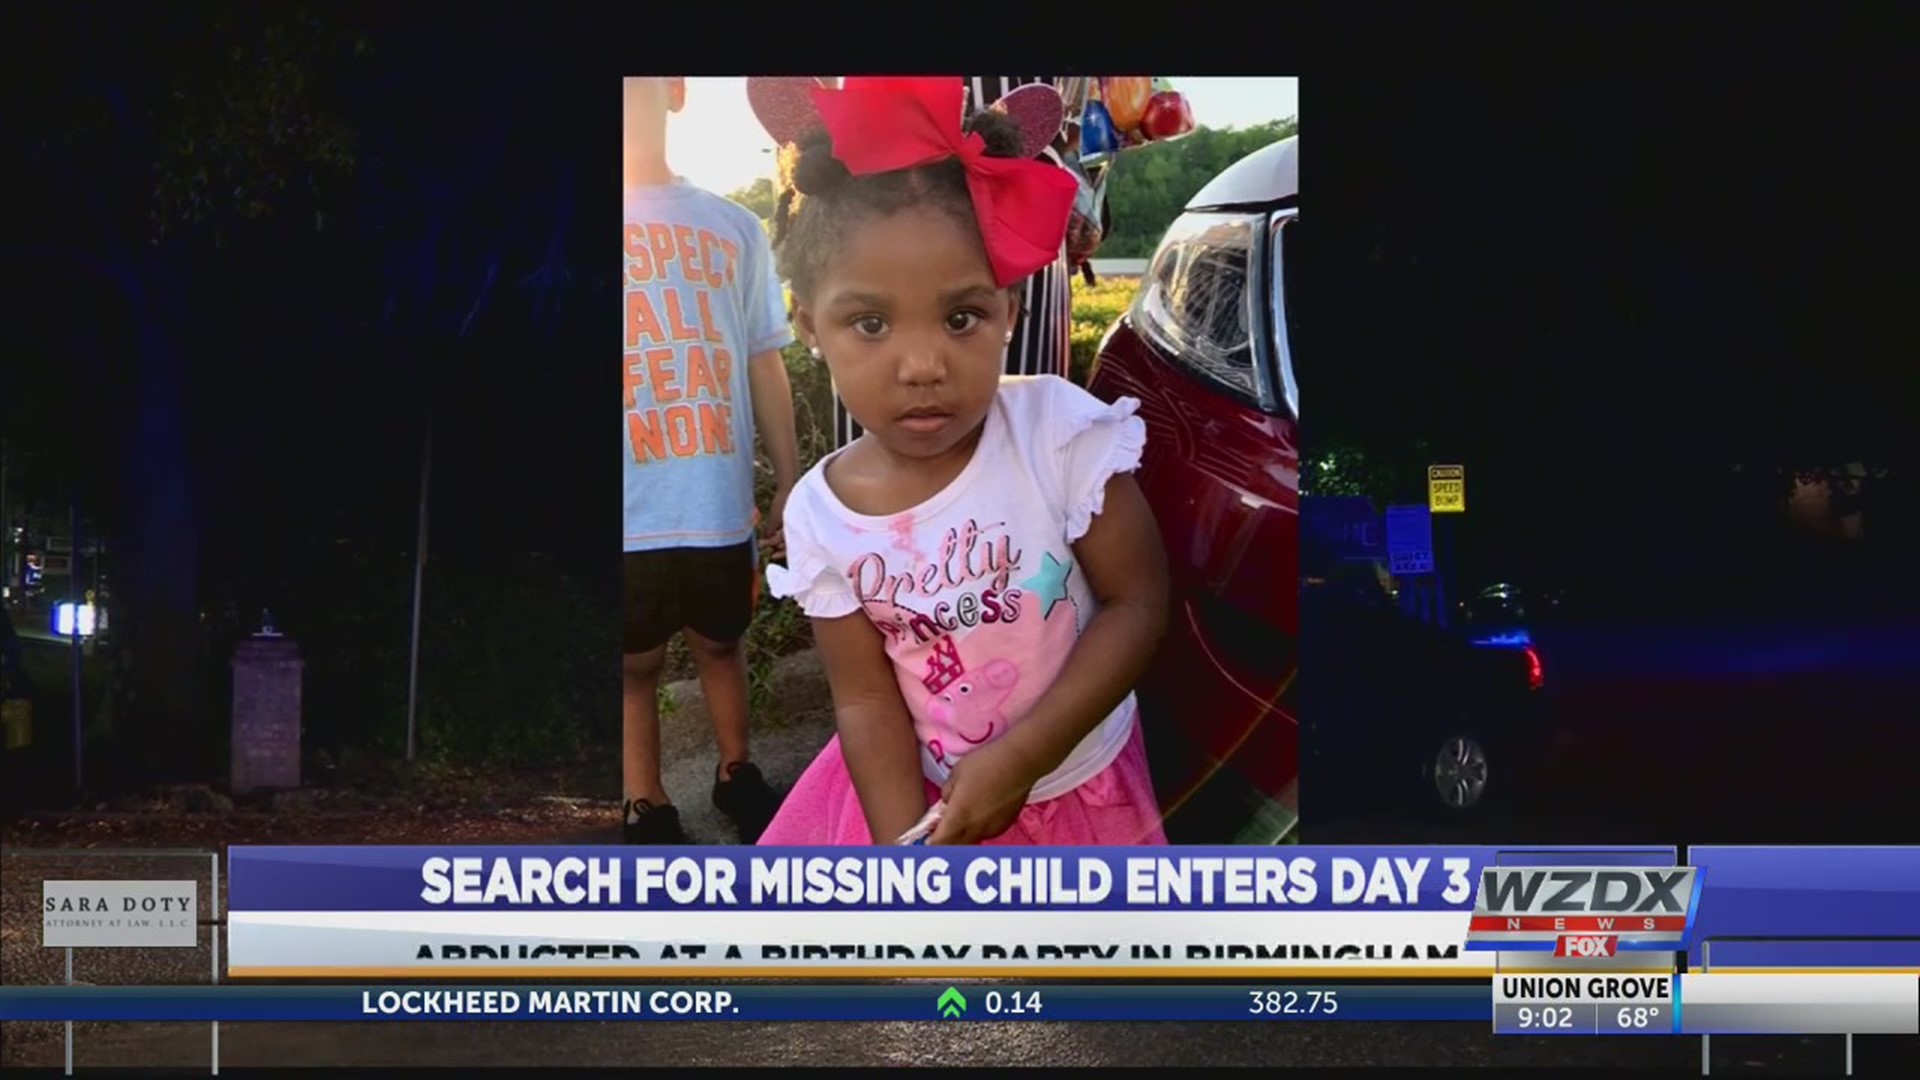 It been nearly three days since 3-year-old Kamille McKinney was abducted while at a birthday party in Birmingham.